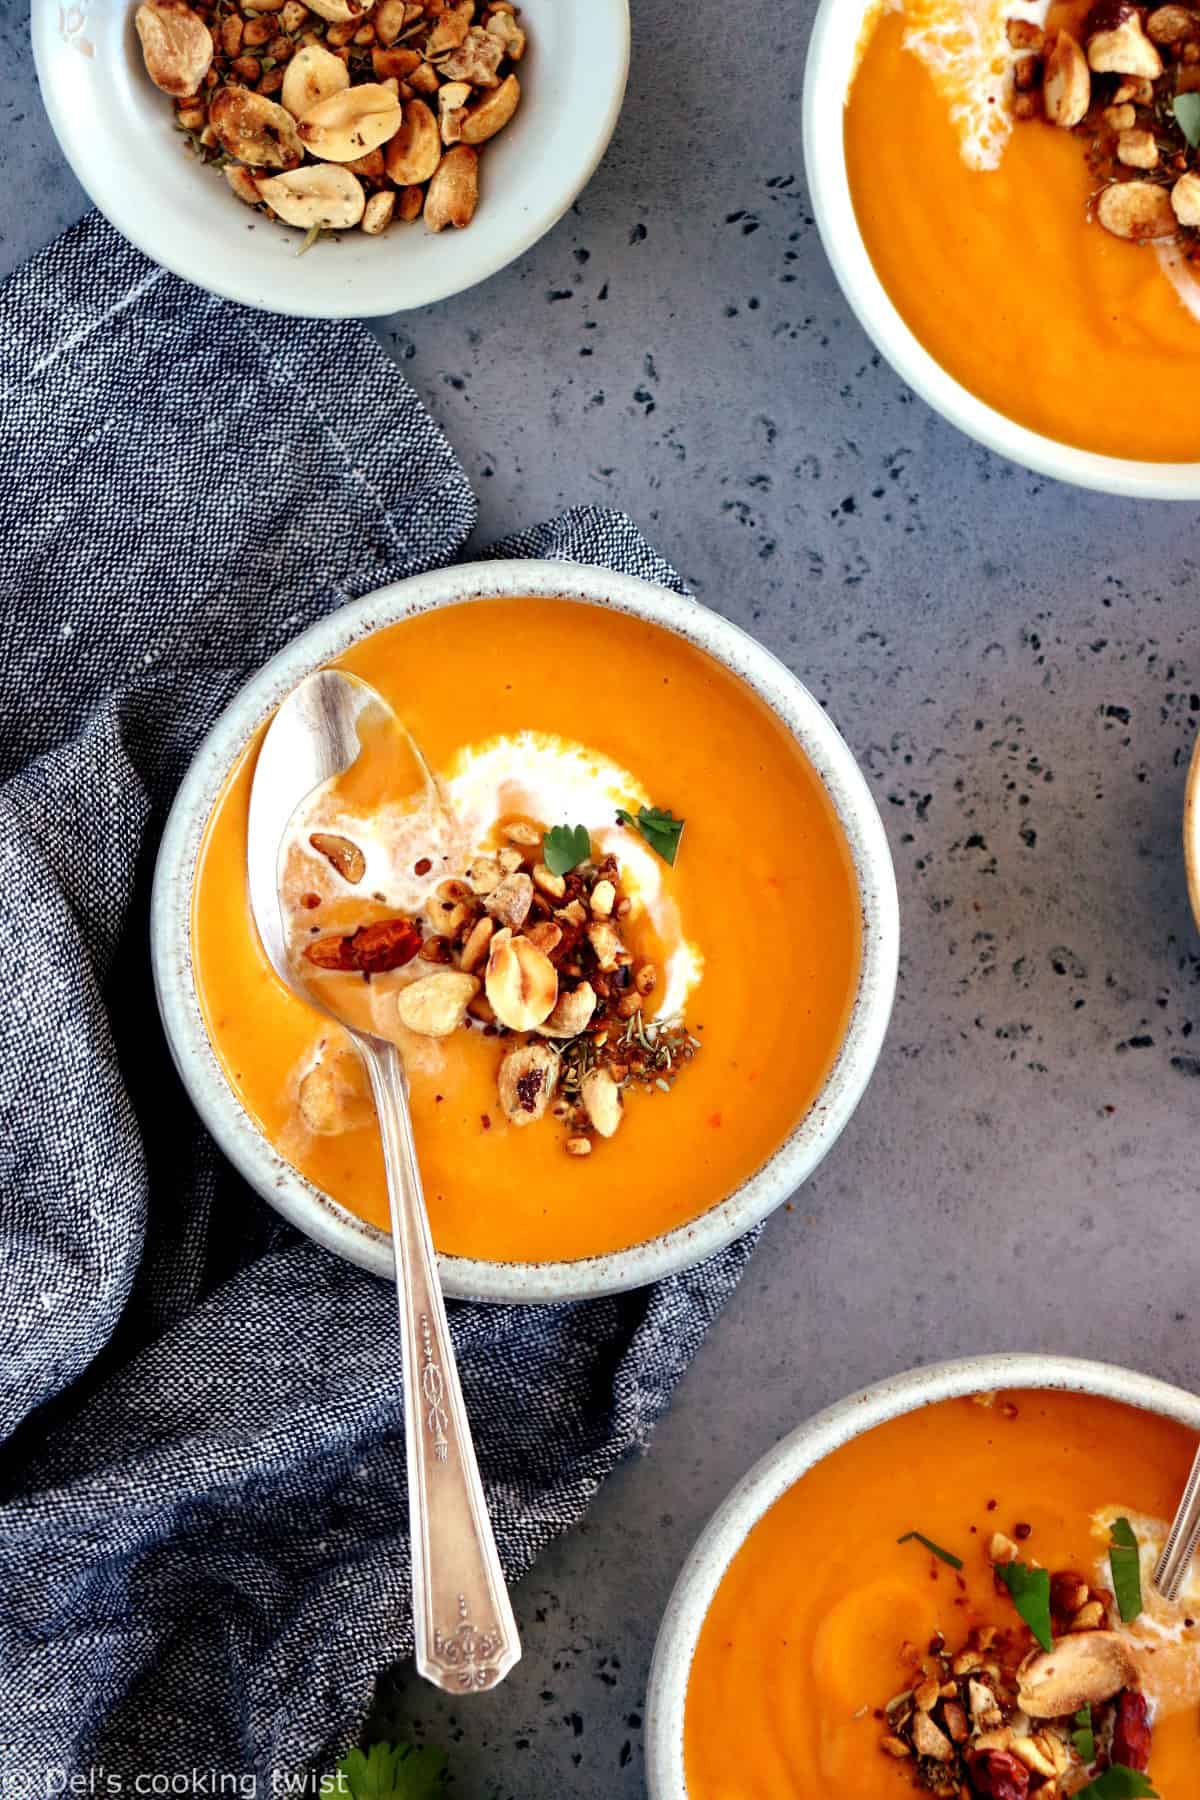 This easy Thai sweet potato soup with red curry is spicy, fragrant and packed with comforting flavors that makes it perfect for a cold night.